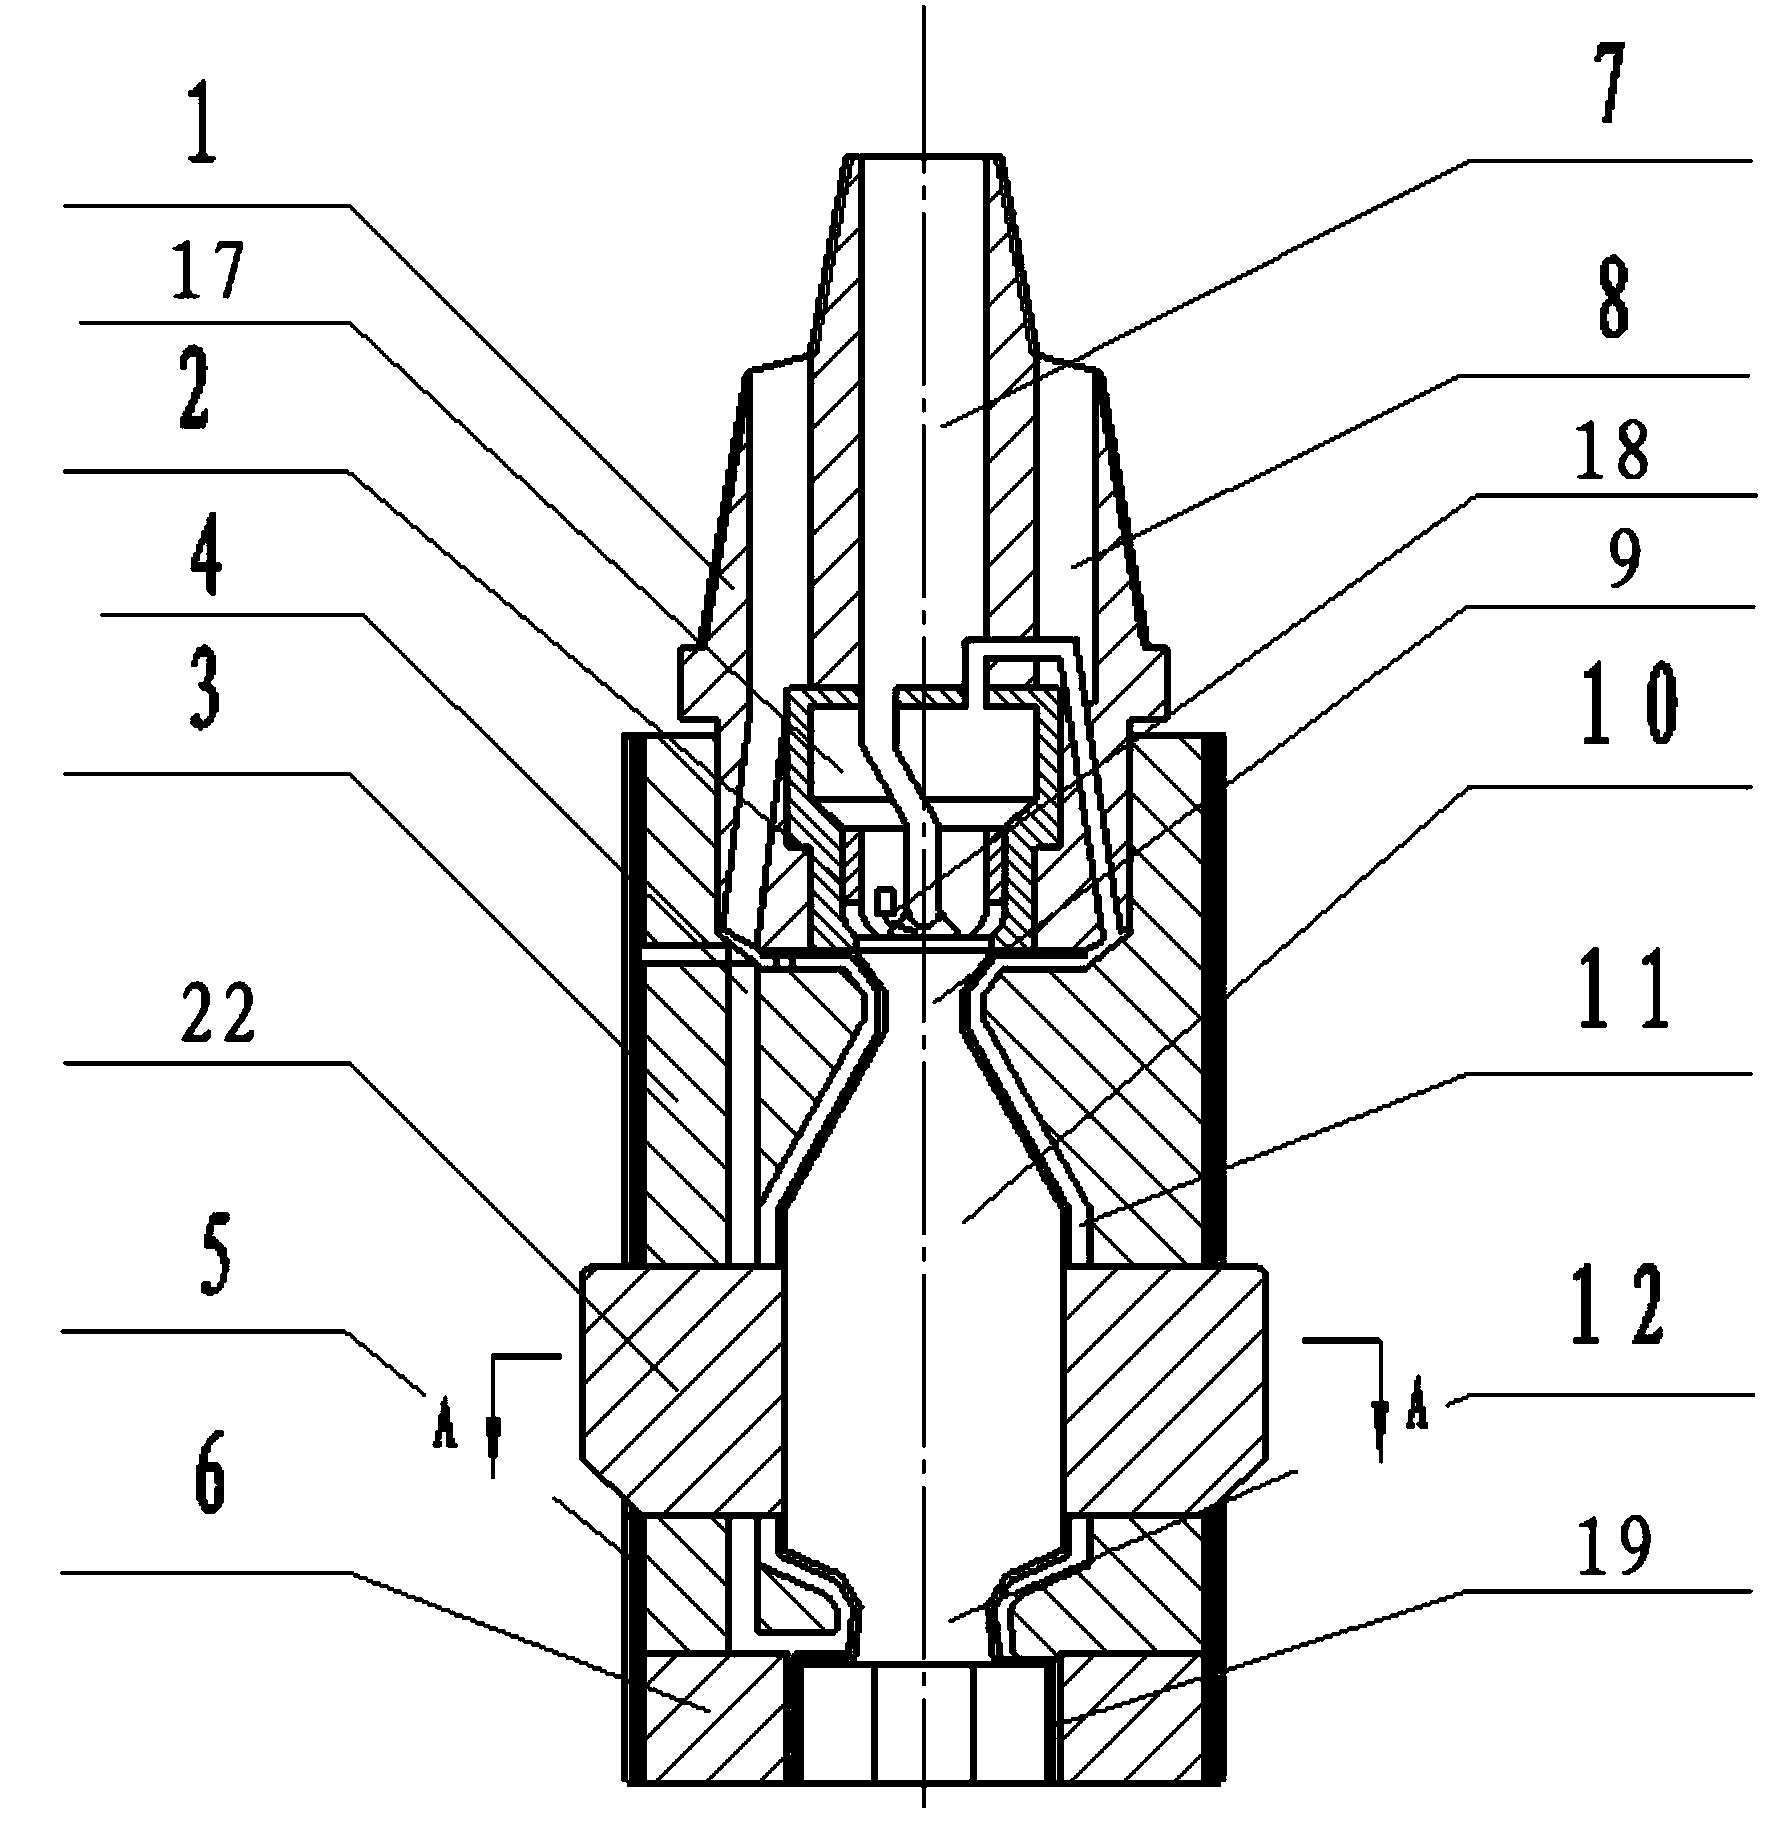 Drill bit capable of enabling well wall to be ceramic